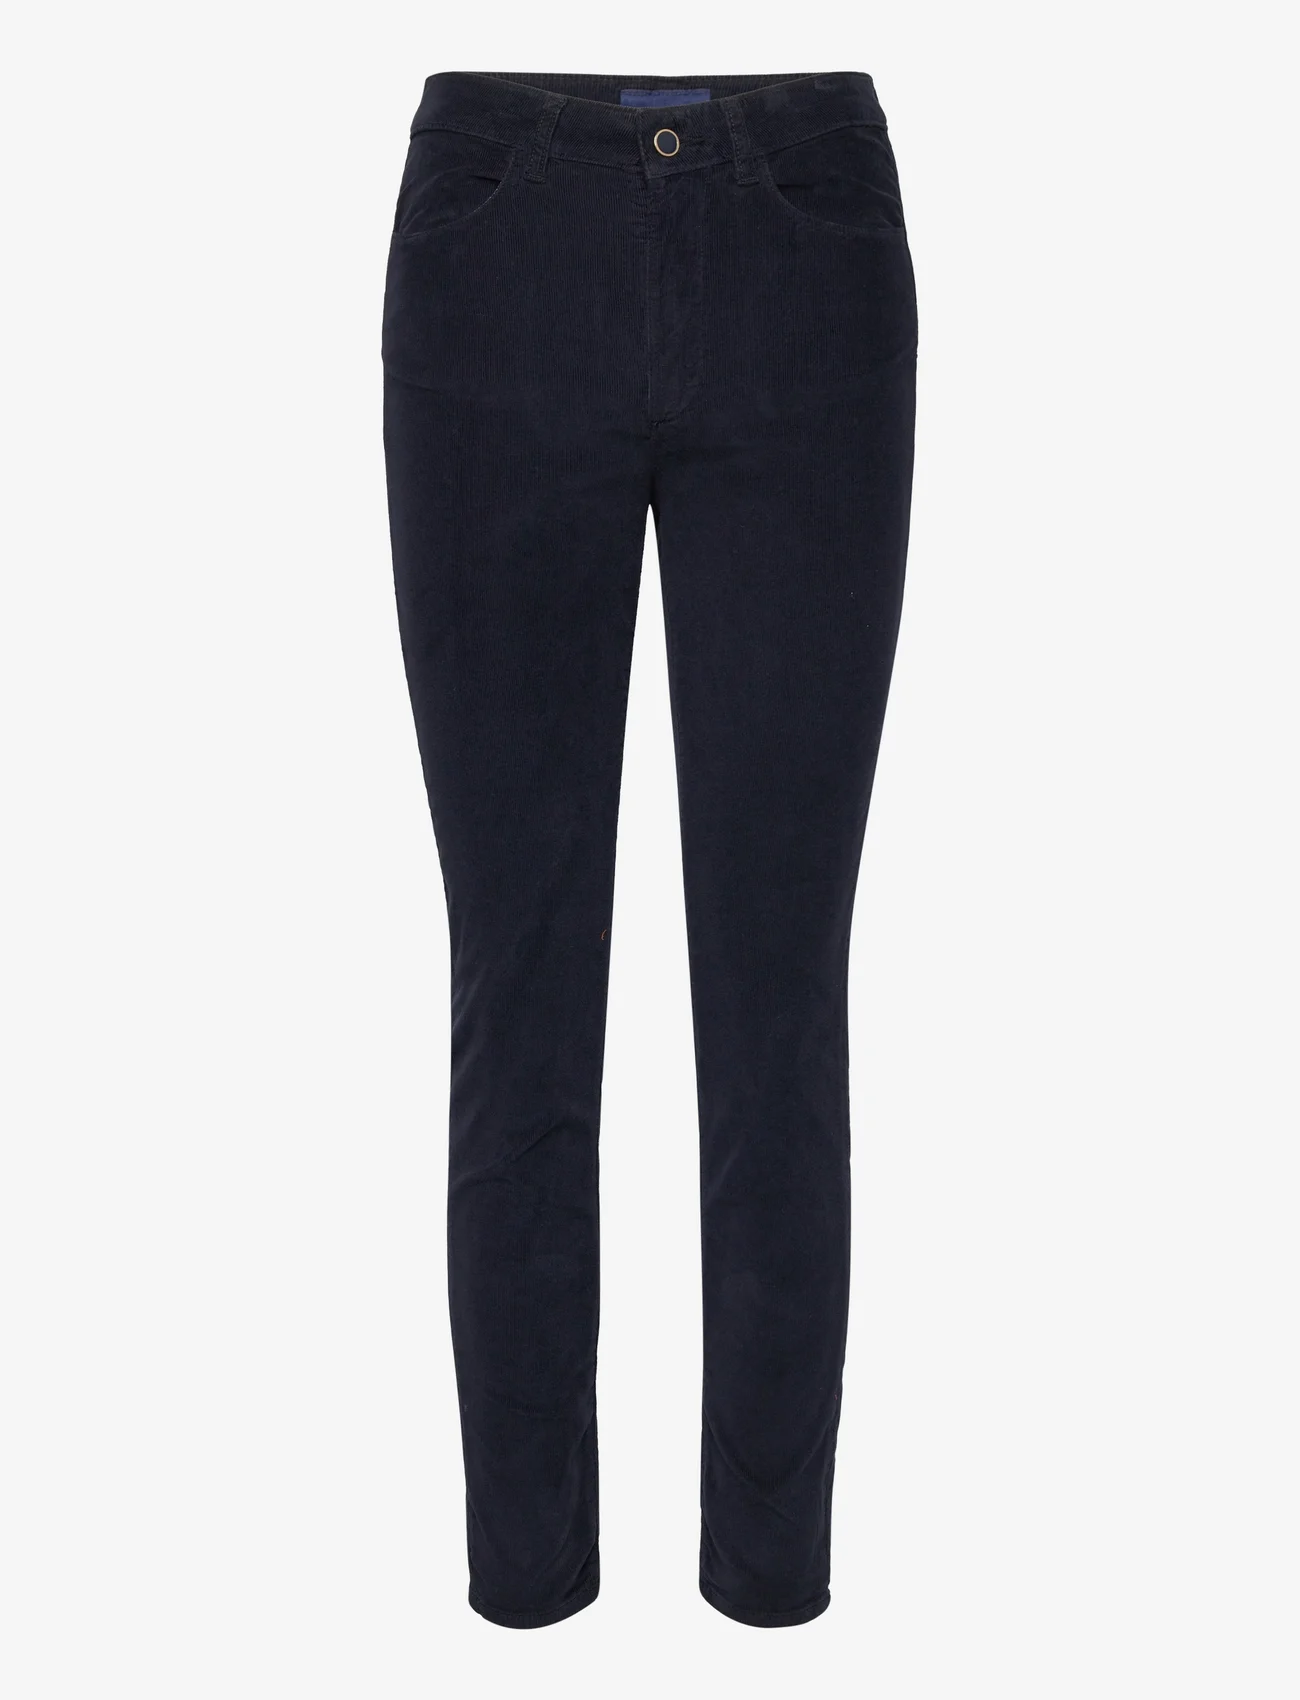 GANT - D2. FARLA CROPPED CORD JEANS - skinny jeans - evening blue - 0